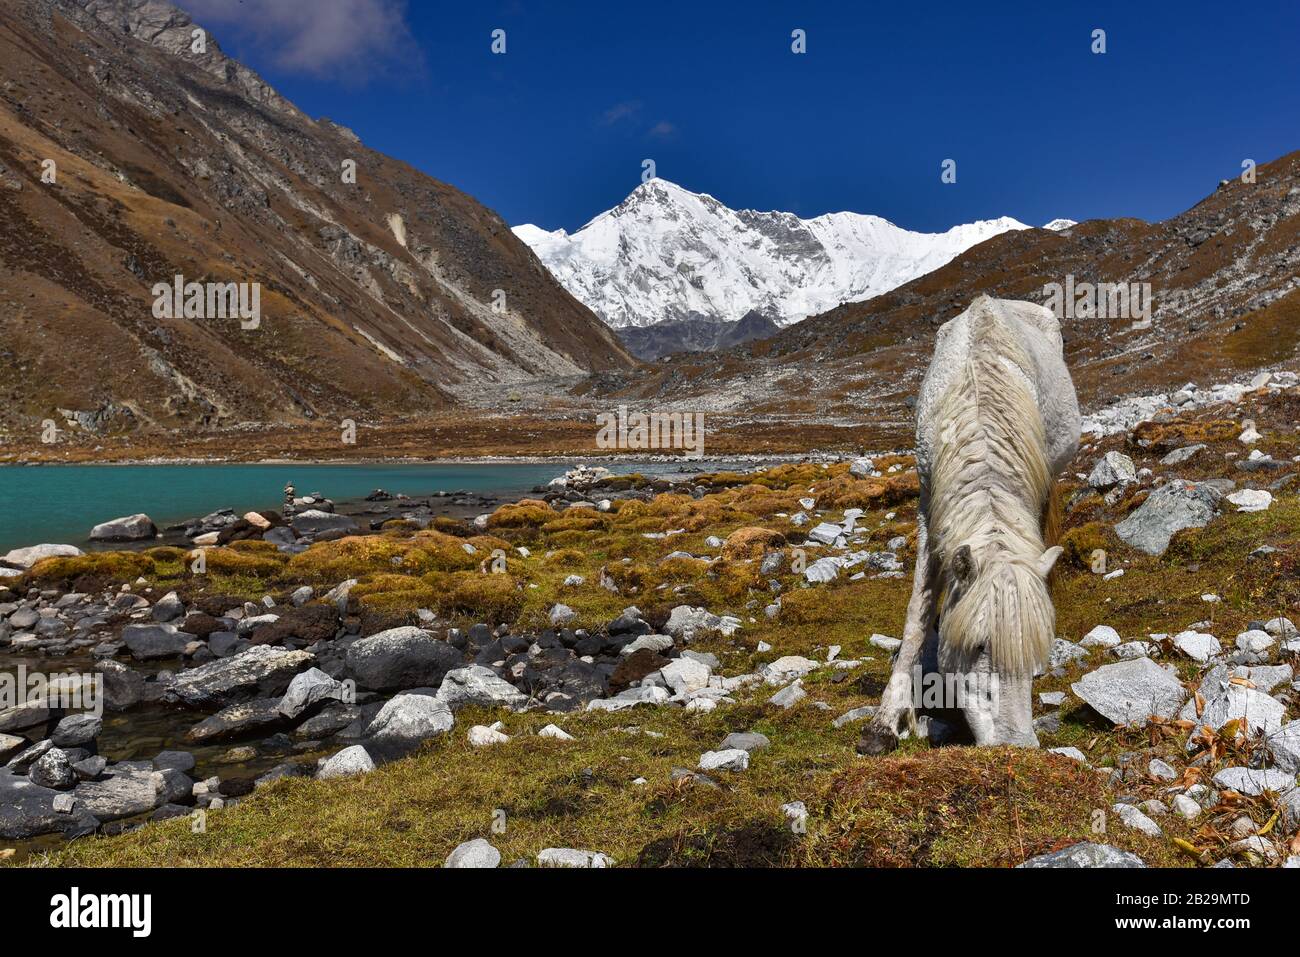 A white horse by Gokyo lake surrounded by snow mountains of Himalayas in Nepal Stock Photo